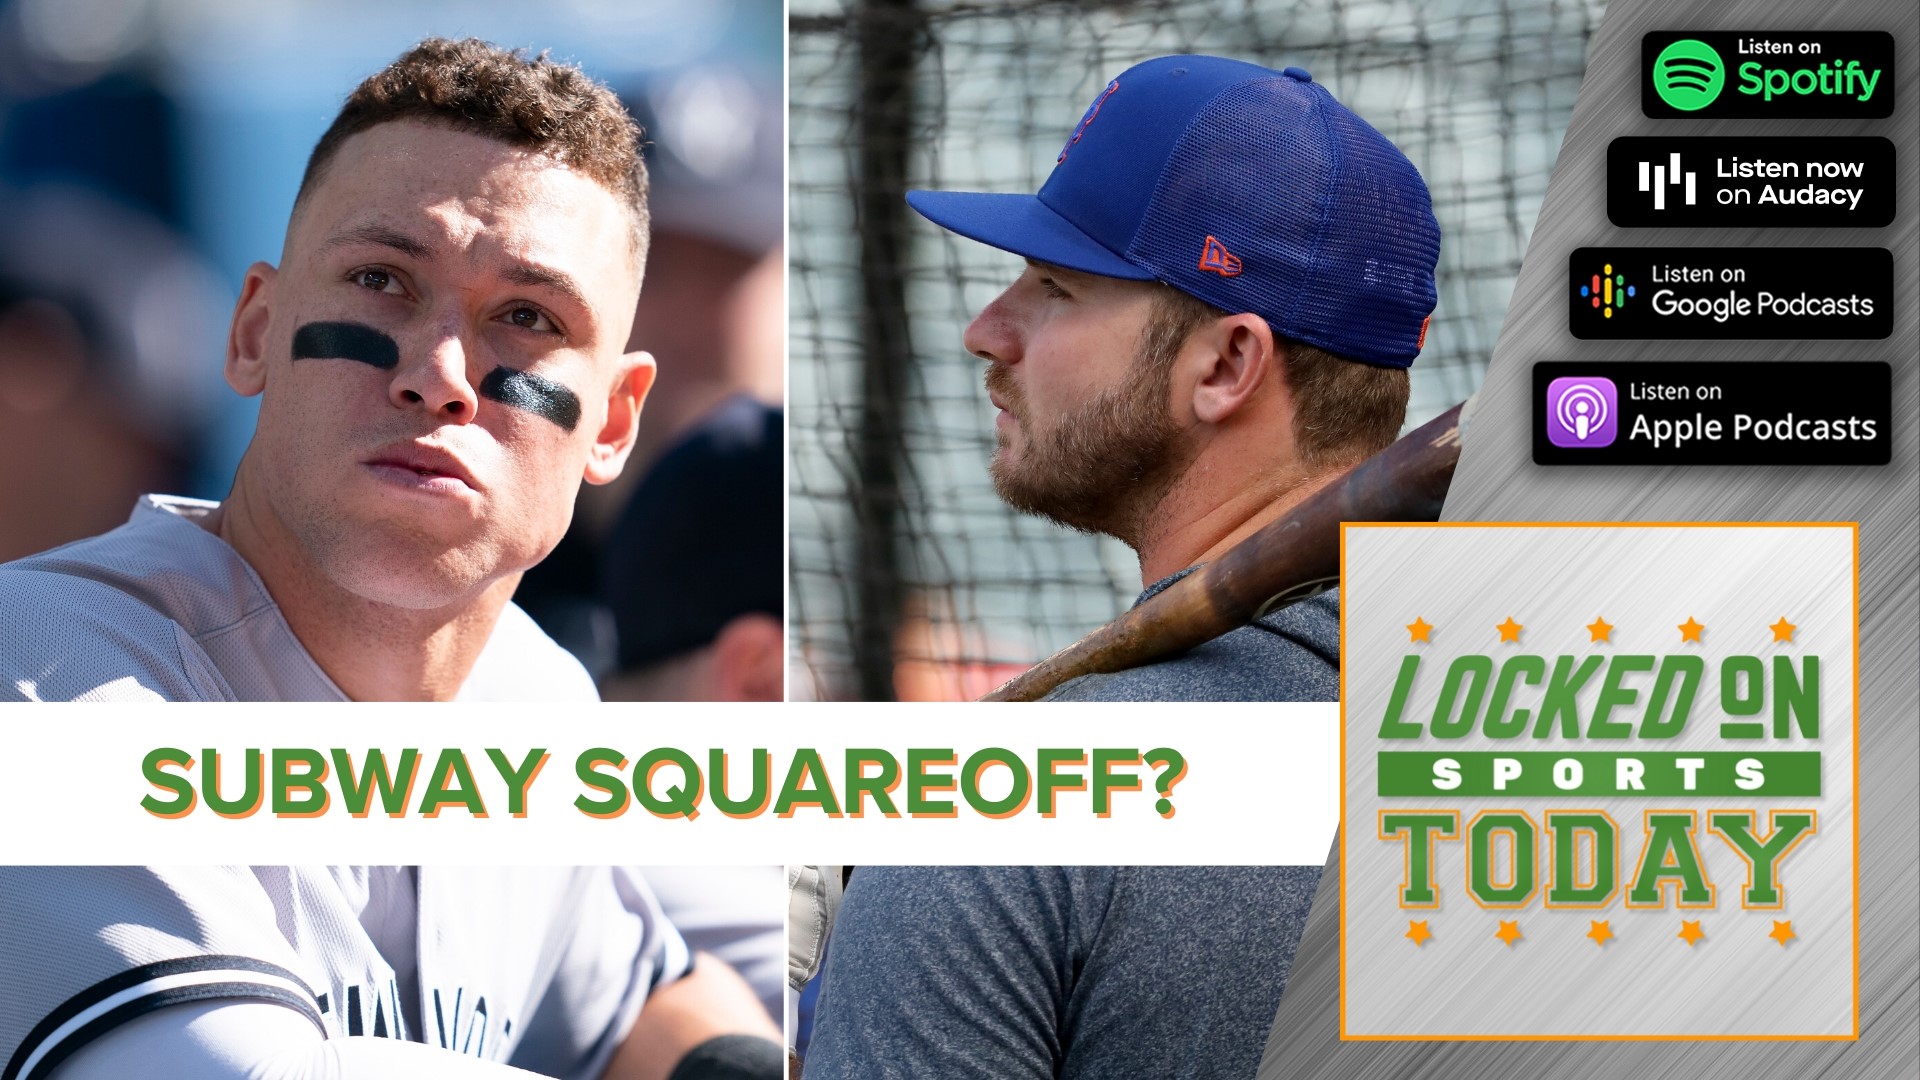 Discussing the day's top sports headlines: Talking all things major league baseball, including a possible Subway Squareoff